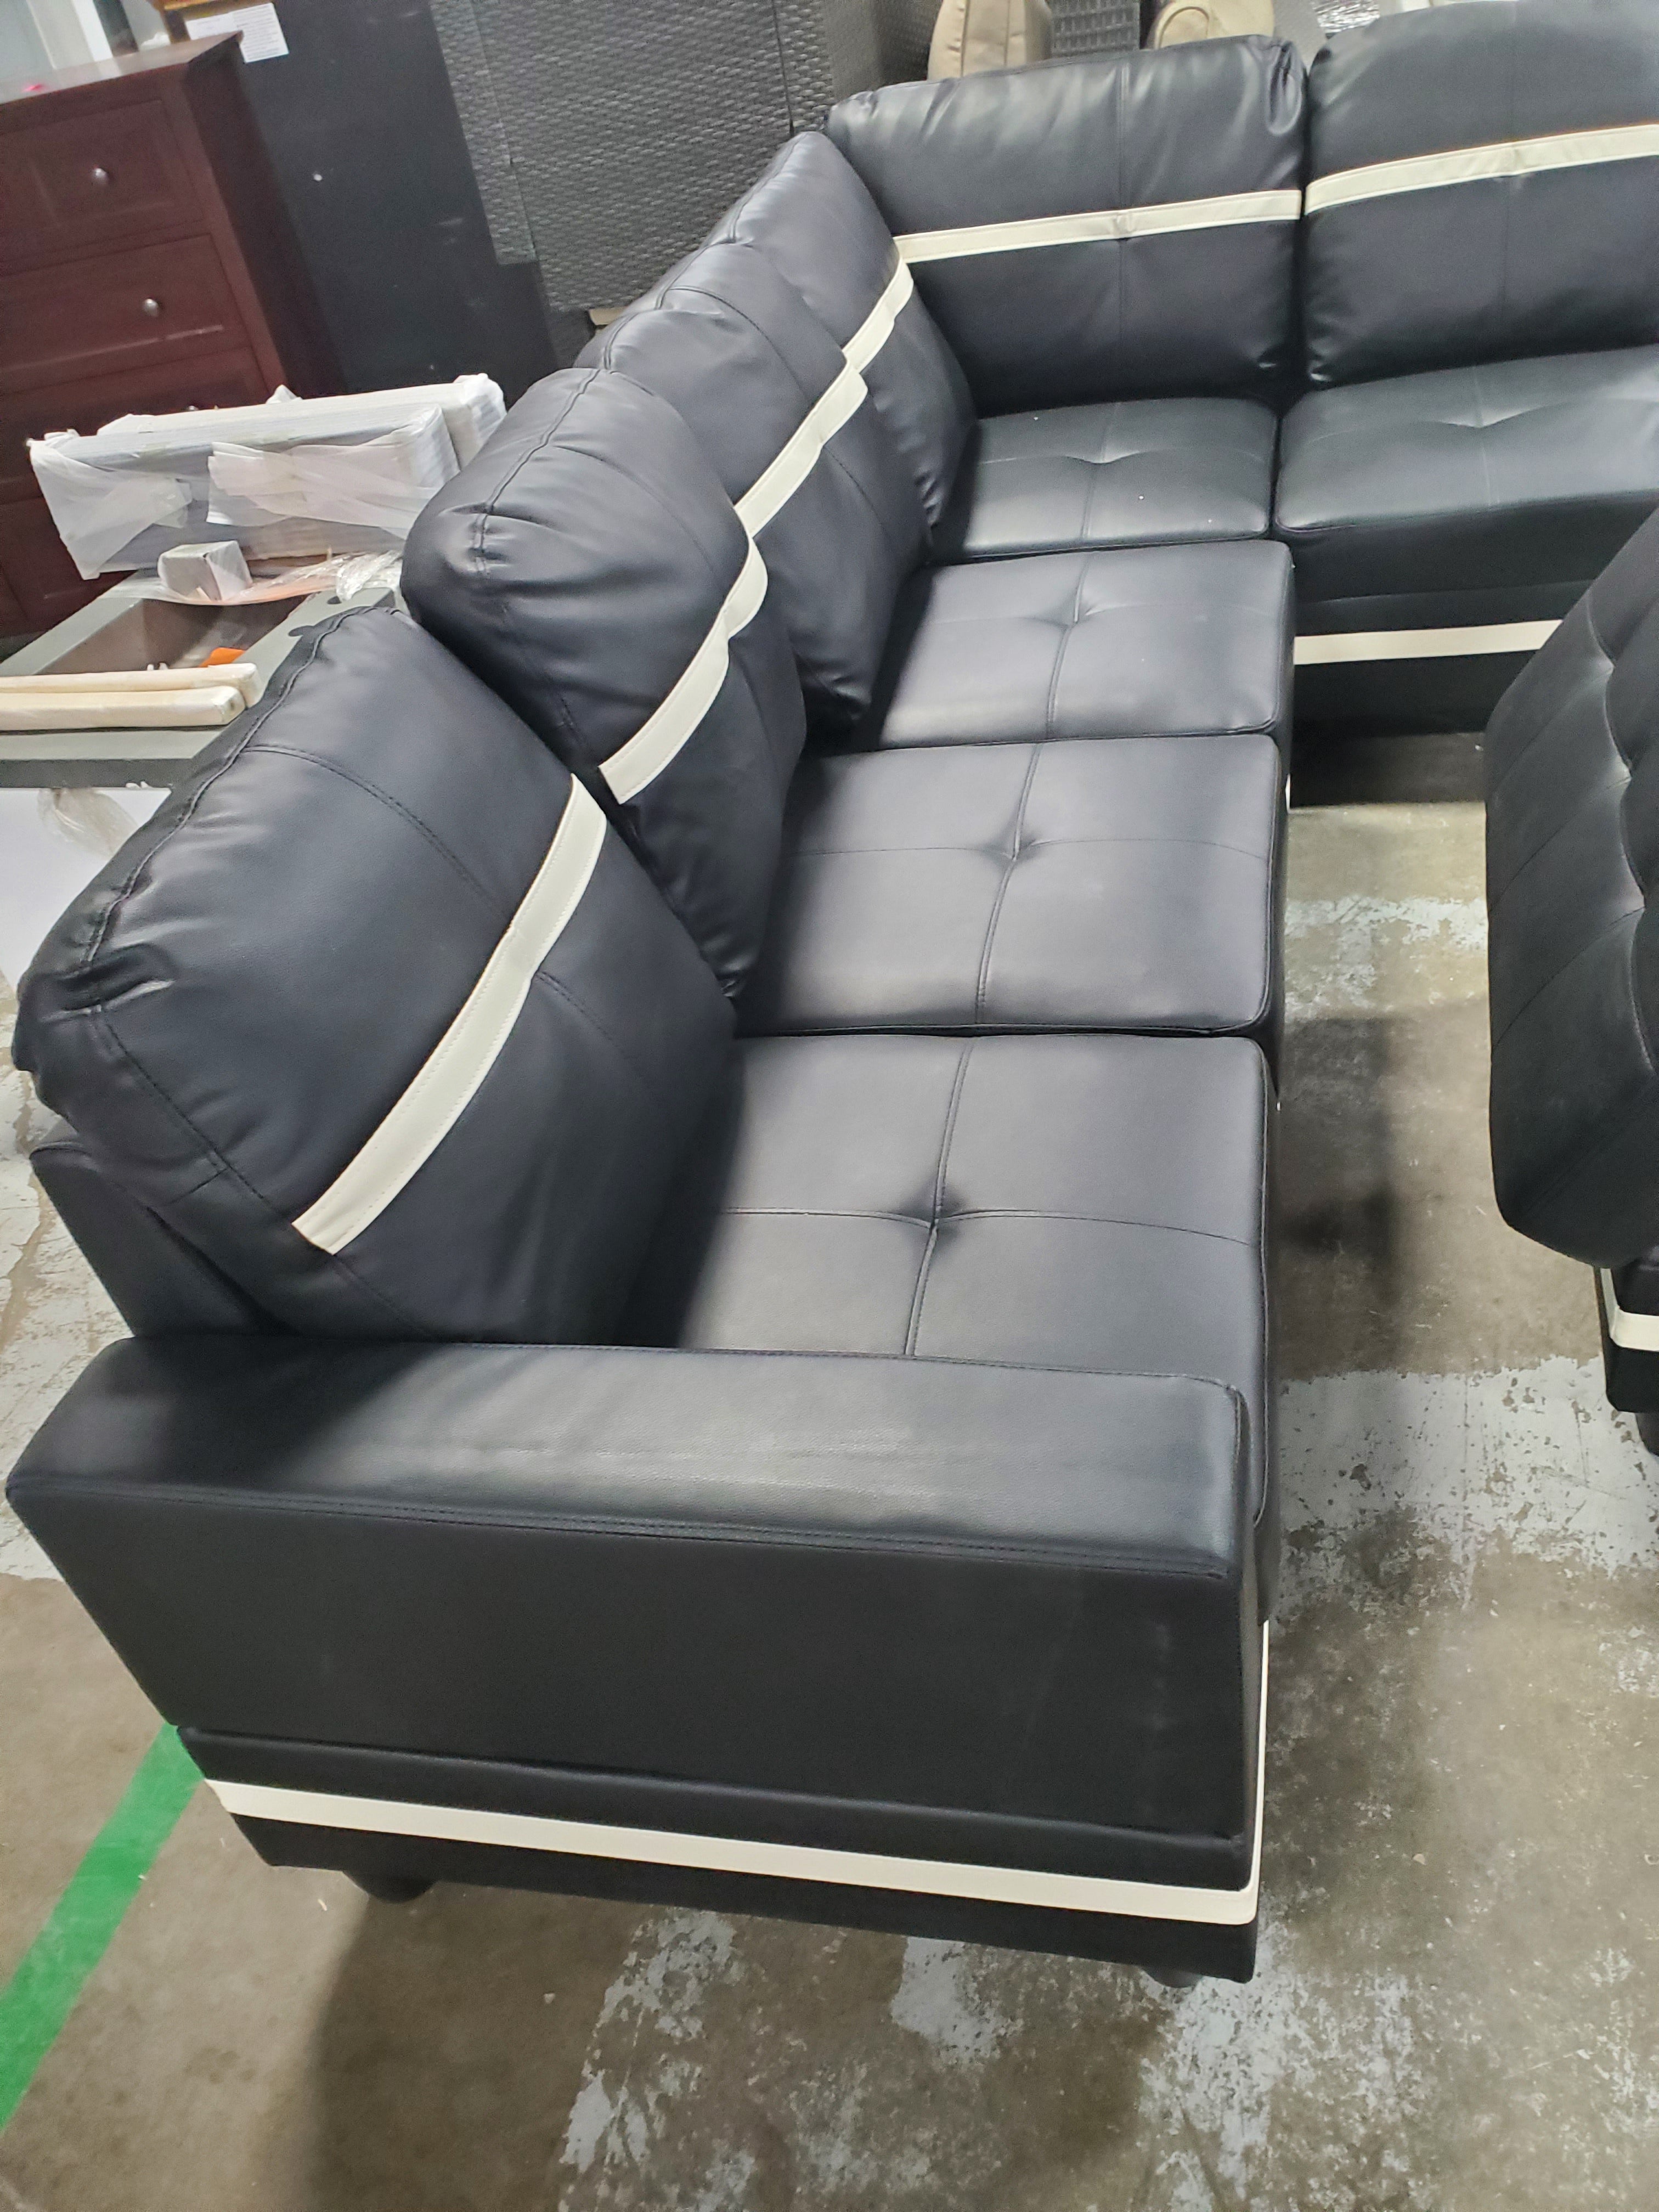 Maumee 103.50" Sectional with Ottoman